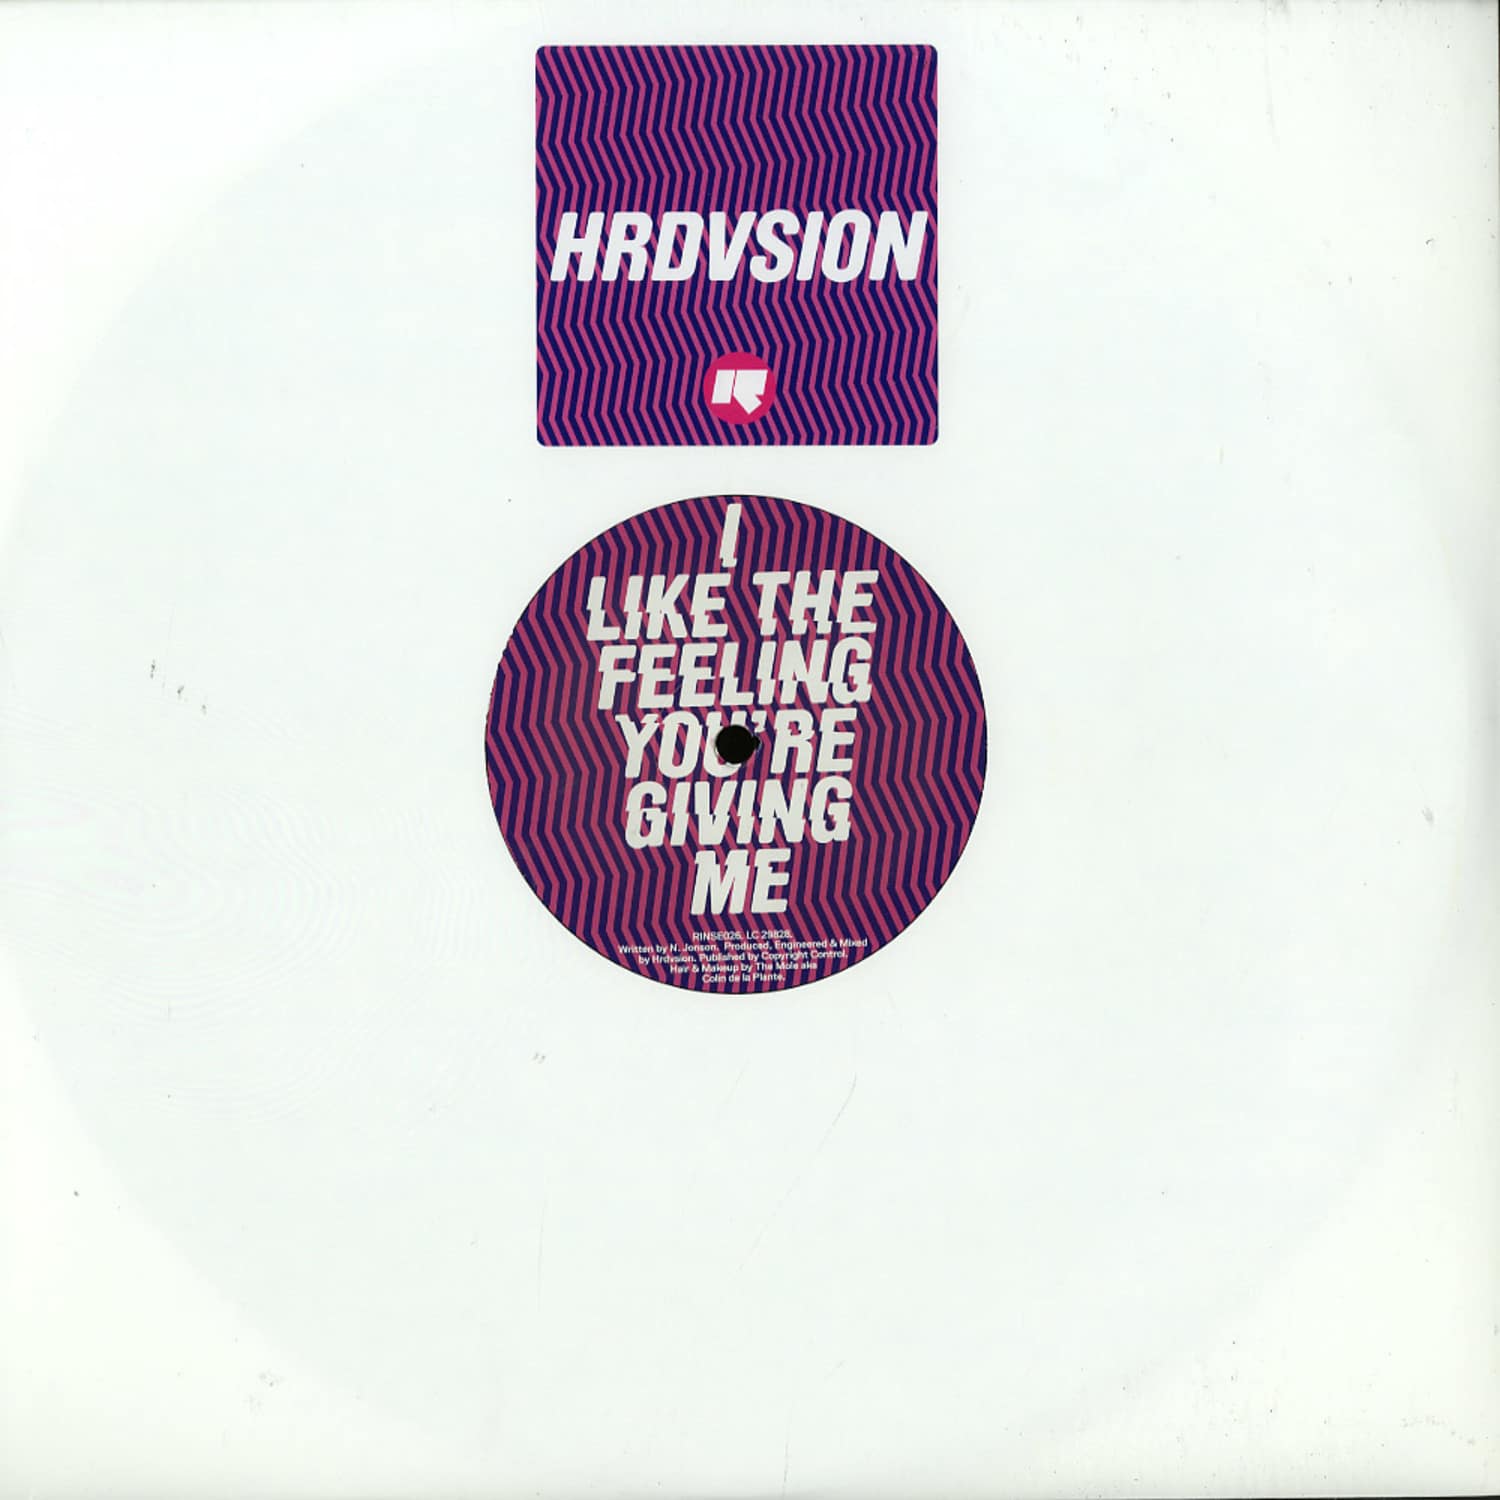 Hrdvsion - I LIKE THE FEELING YOU ARE GIVING ME